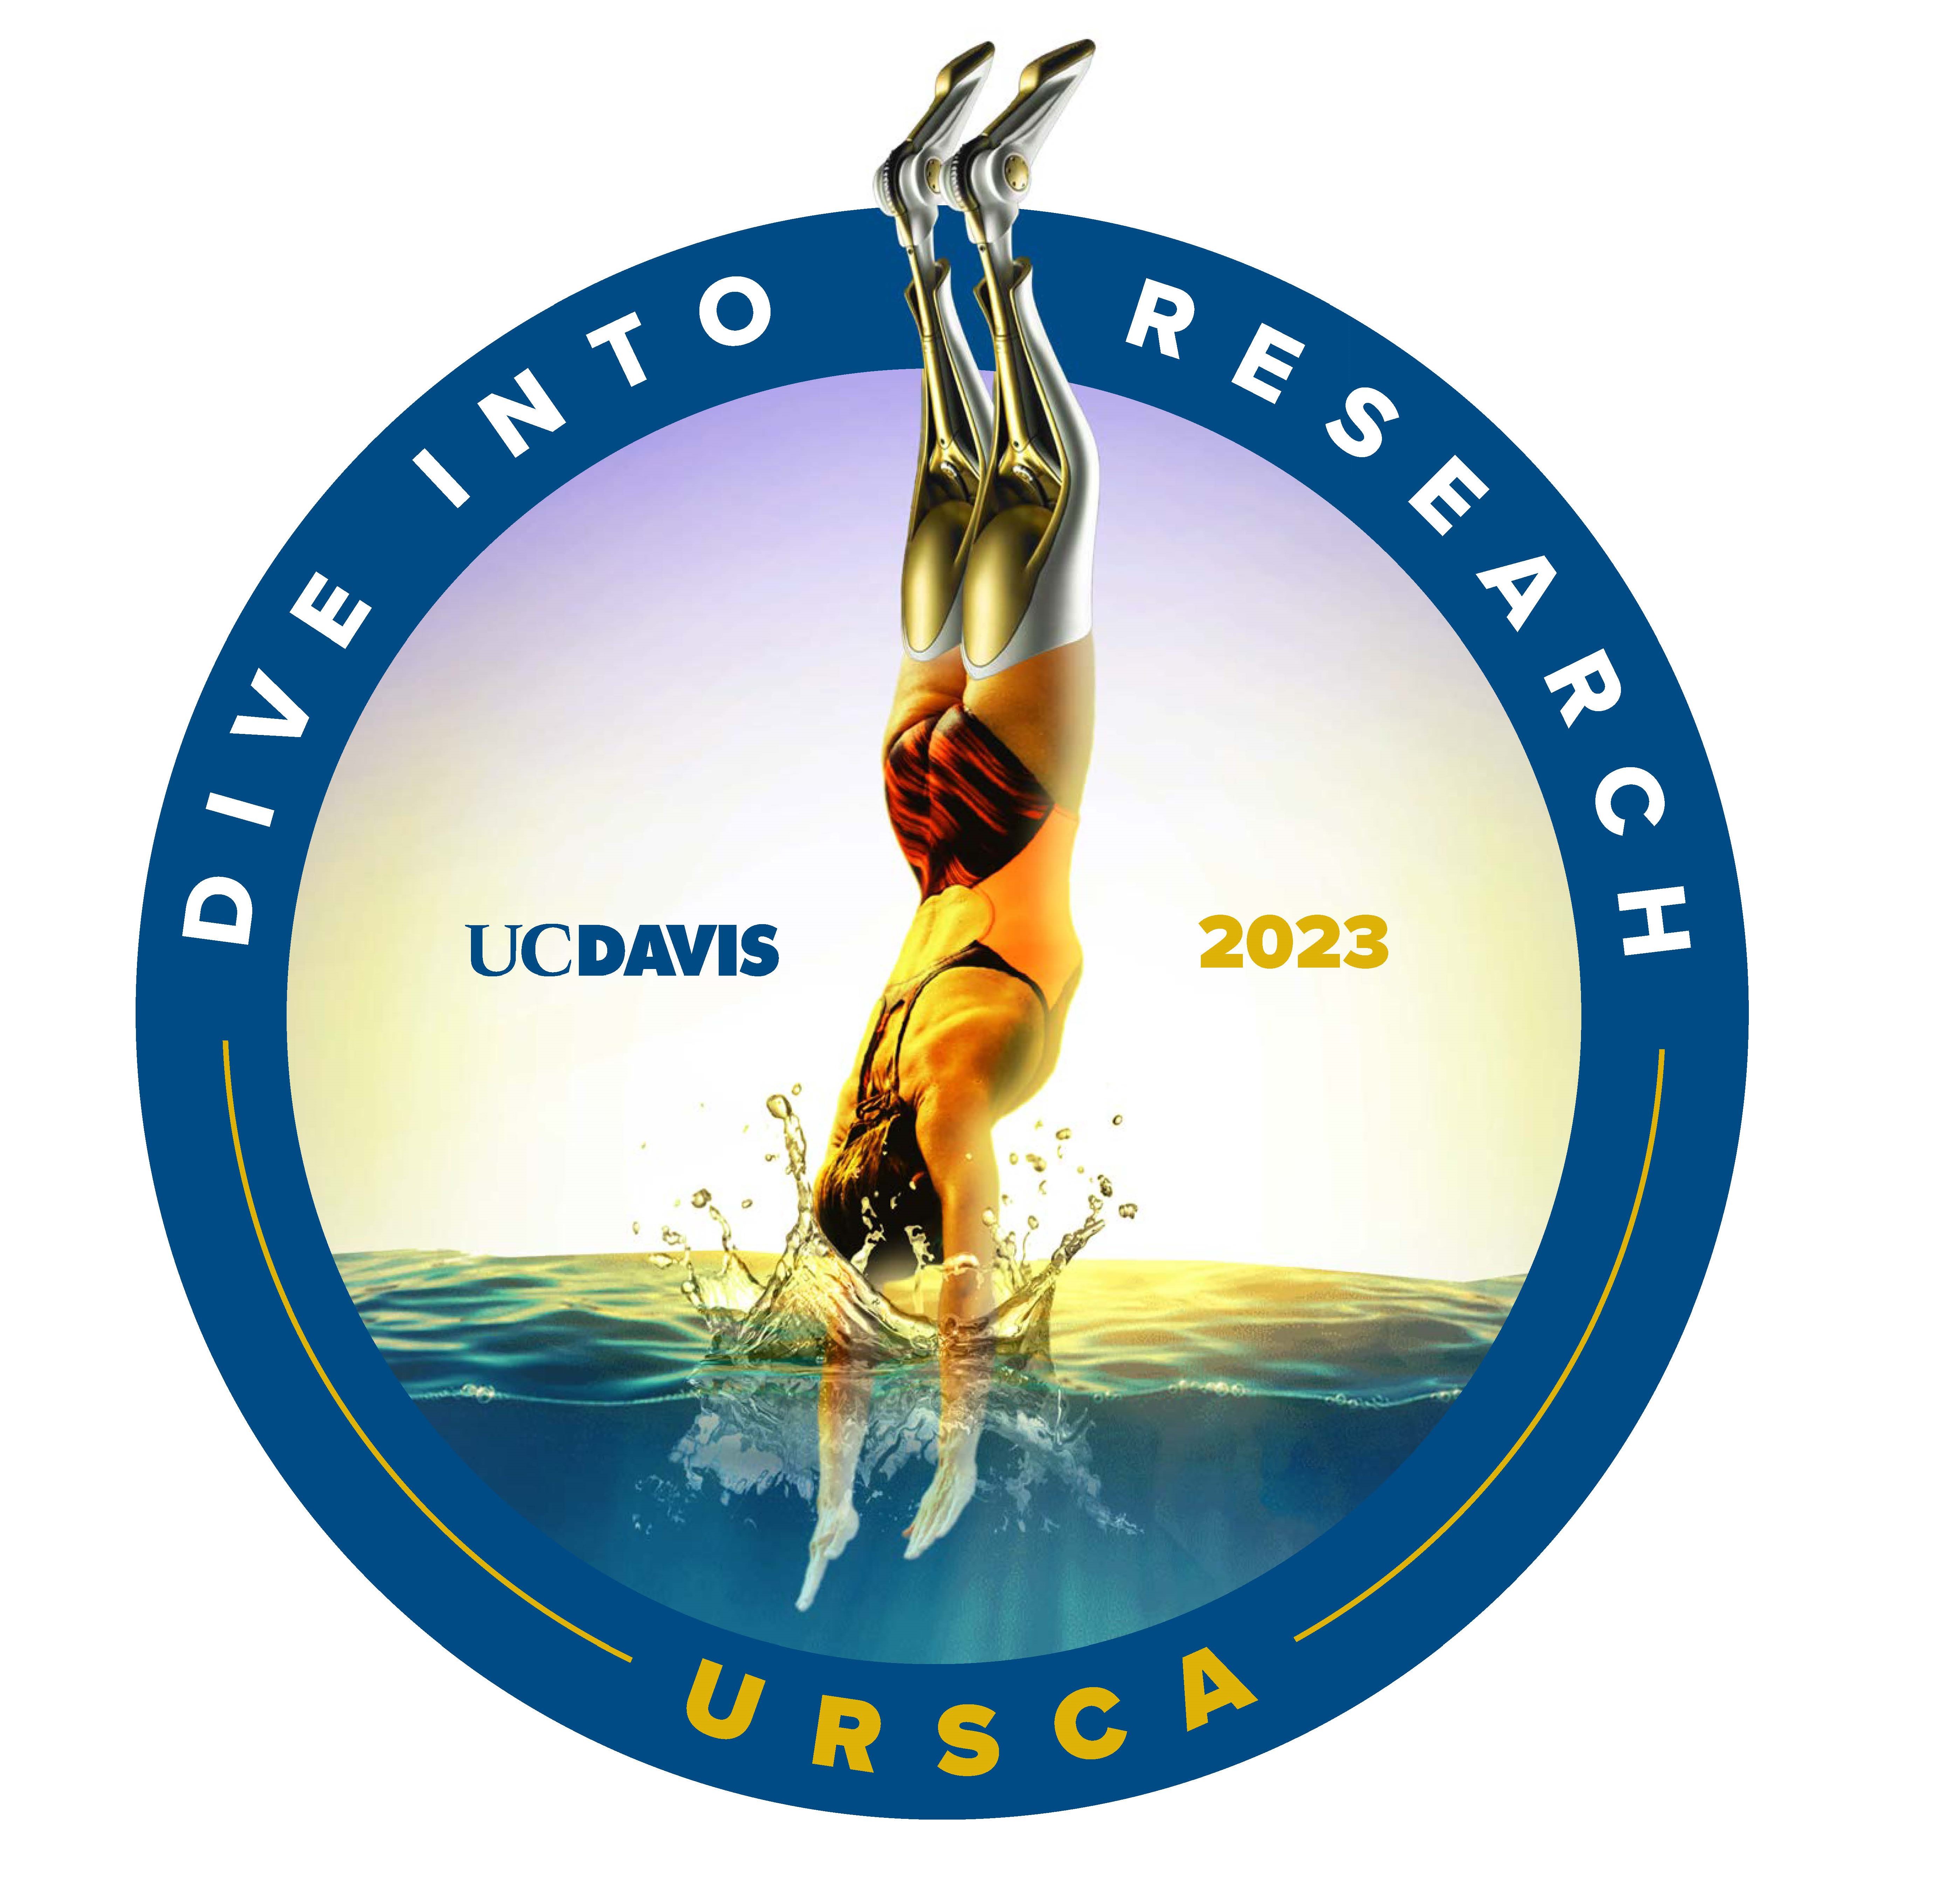 Graphic design of a diver with prosthetic legs diving into an ocean that is shown in a cutaway view.  the background is purplish and bluish with yellow white sunlight behind the diver. 